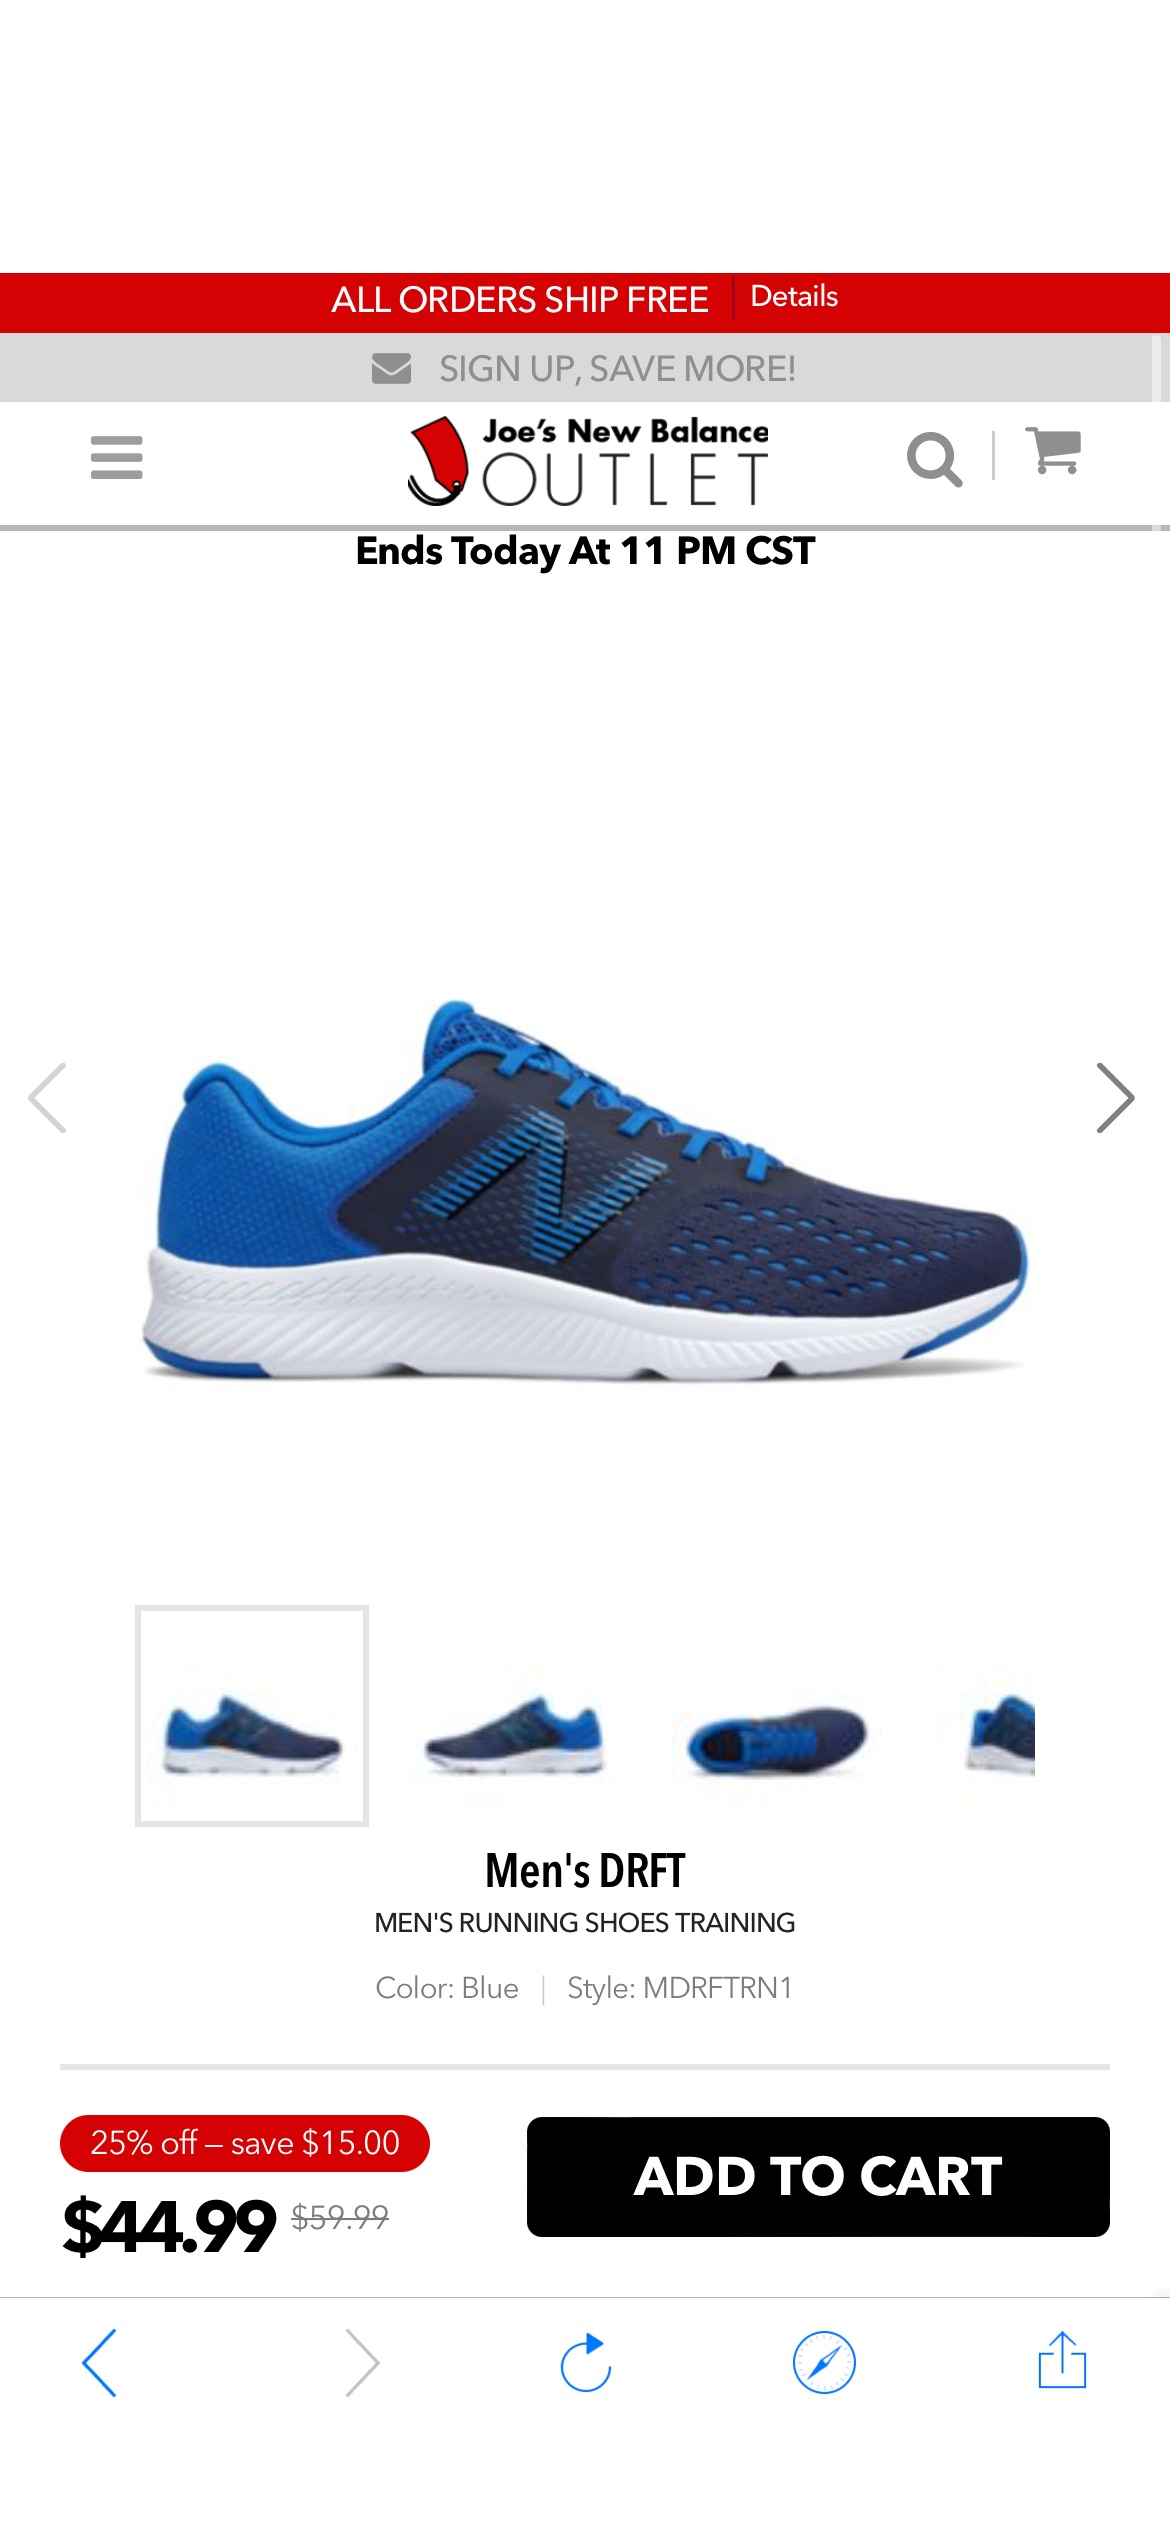 Daily Deal - Daily Discounts on New Balance Shoes | Joe's New Balance Outlet Online 运动鞋